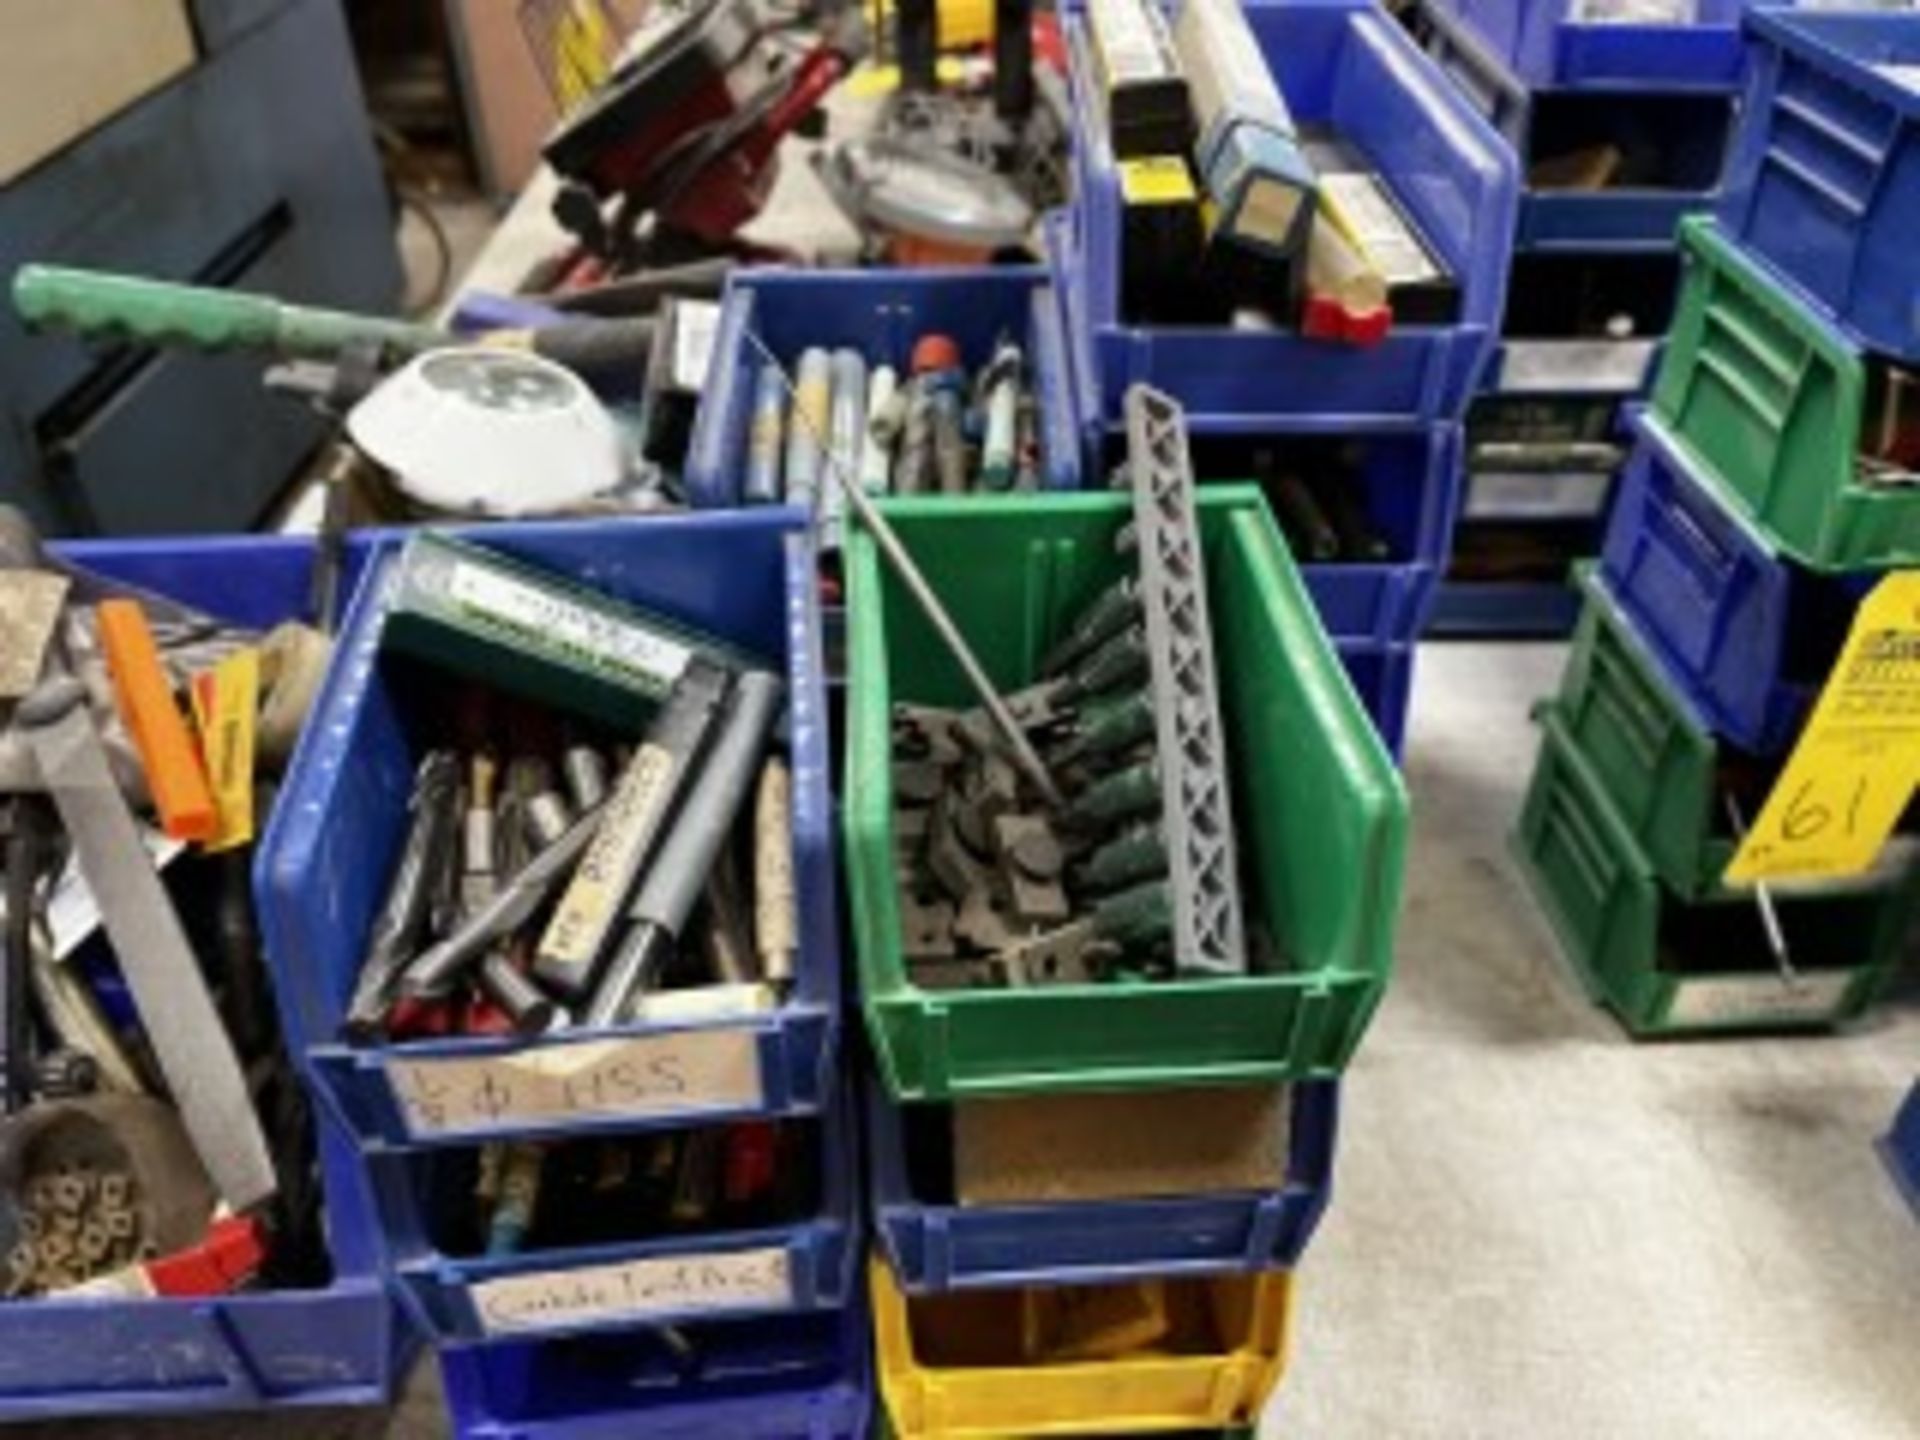 BINS ASSORTED TOOLS, GAGES, DRILL BITS, INSERTS, ETC - Image 2 of 3